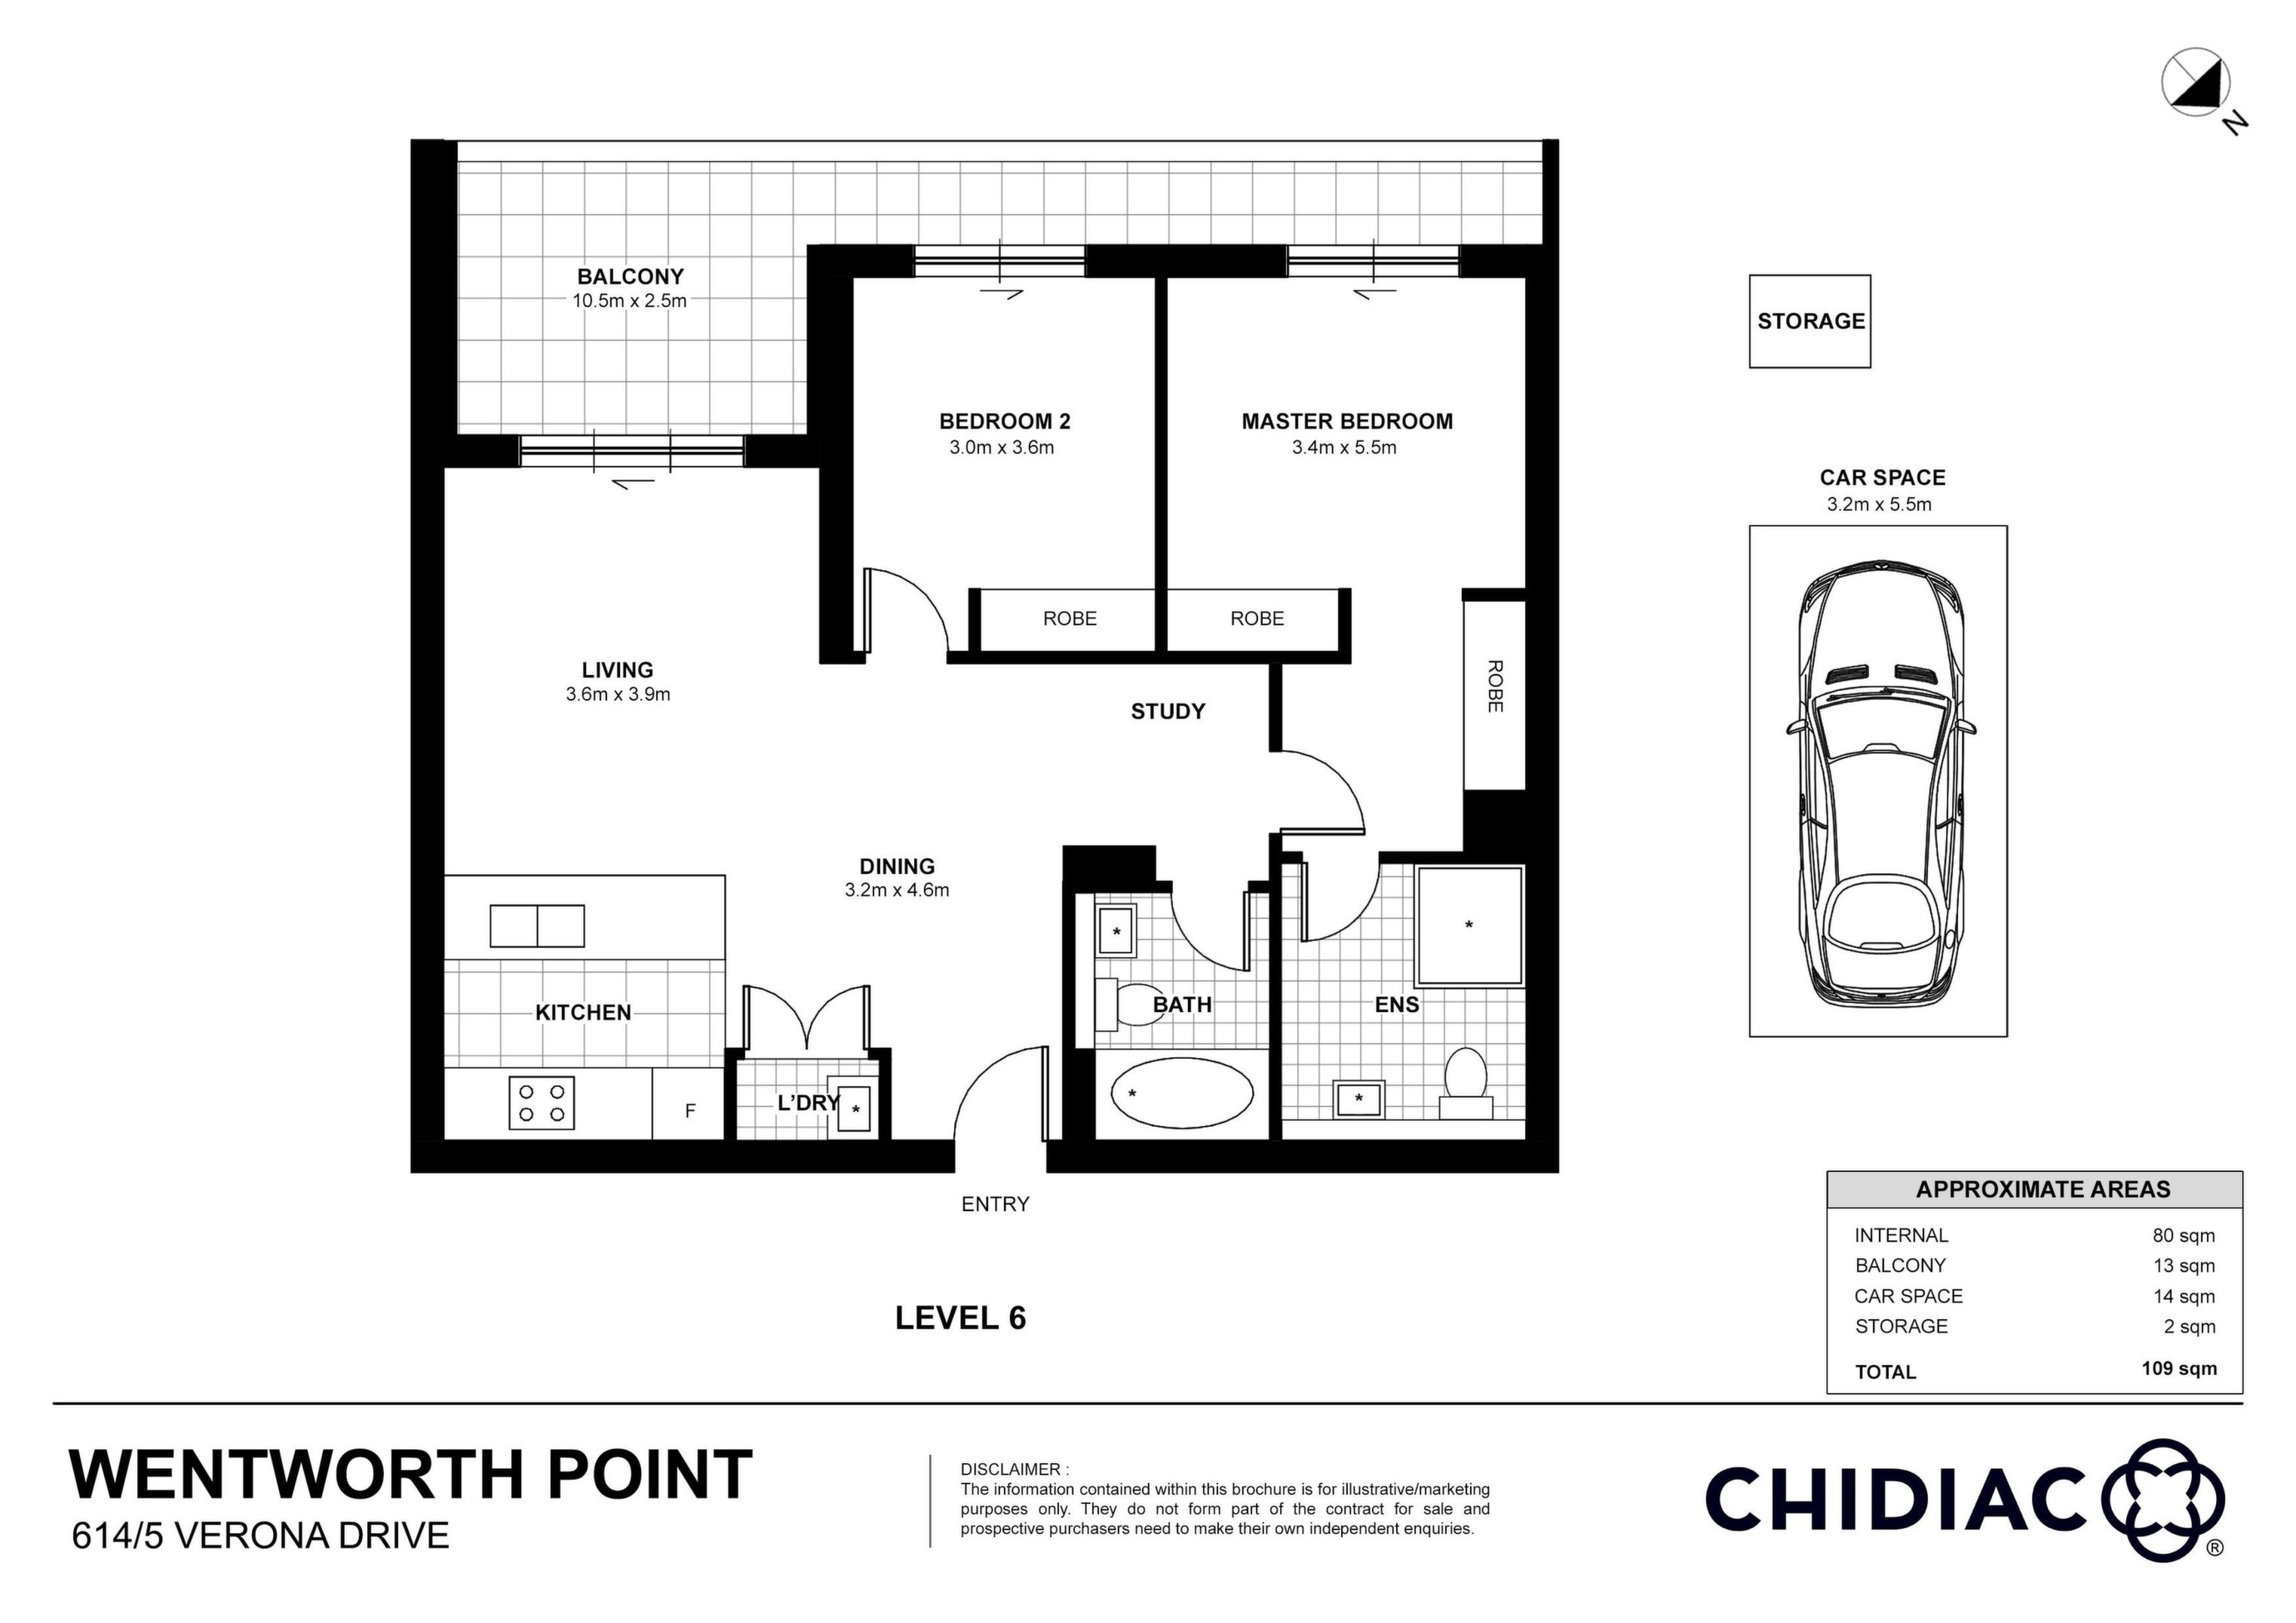 614/5 Verona Drive, Wentworth Point Sold by Chidiac Realty - floorplan